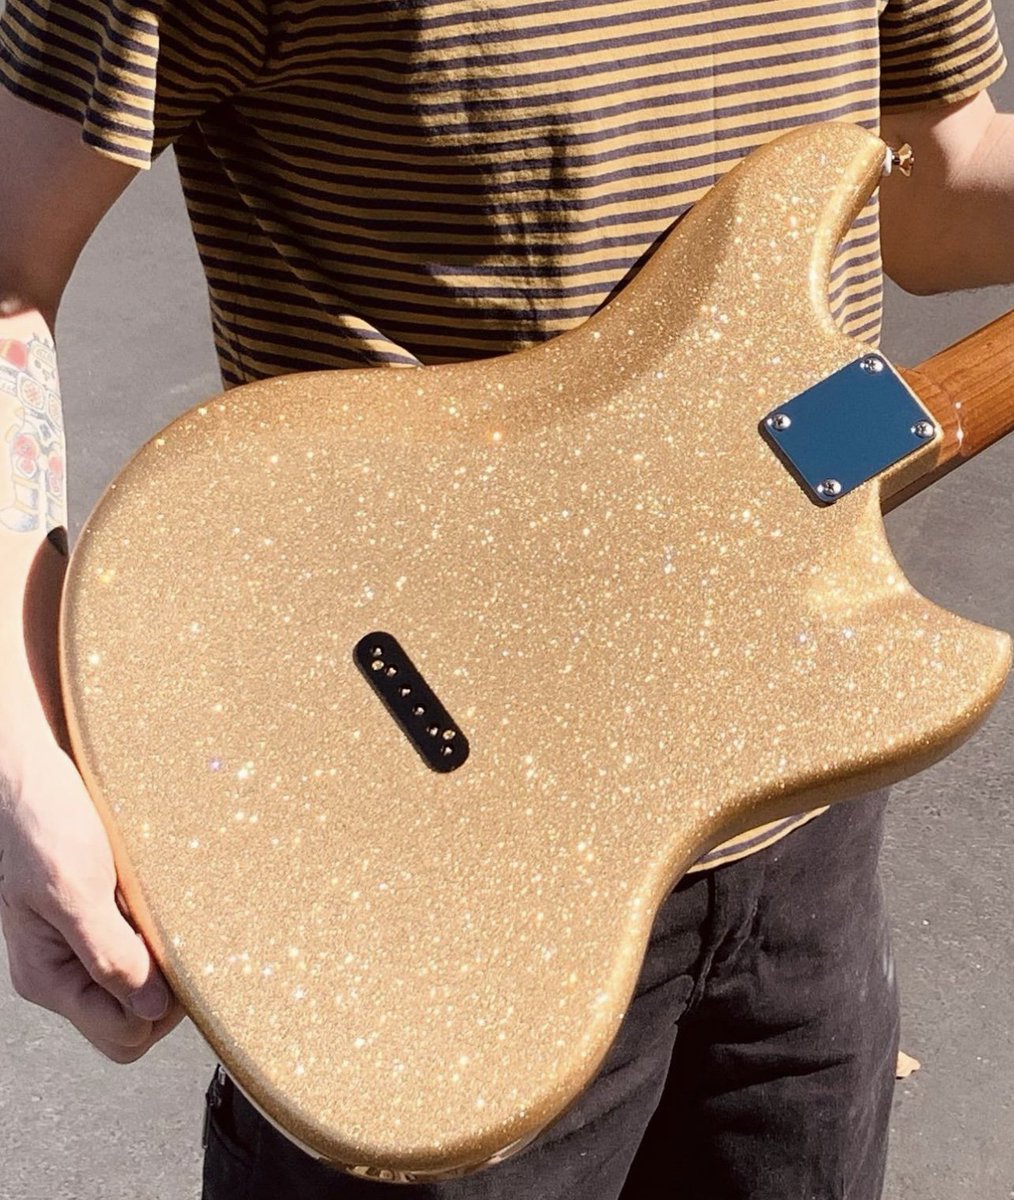 This one is for the lefties! 💁‍♂️ @kauerguitars first lefty Electroliner in Sahara Gold flake with @BillyFGibbons Red Devil pickups! We now accept PayPal and offer financing through Klarna. Get your Billy Gibbons Red Devil pickups today: bit.ly/3CMMTKX #SeymourDuncan